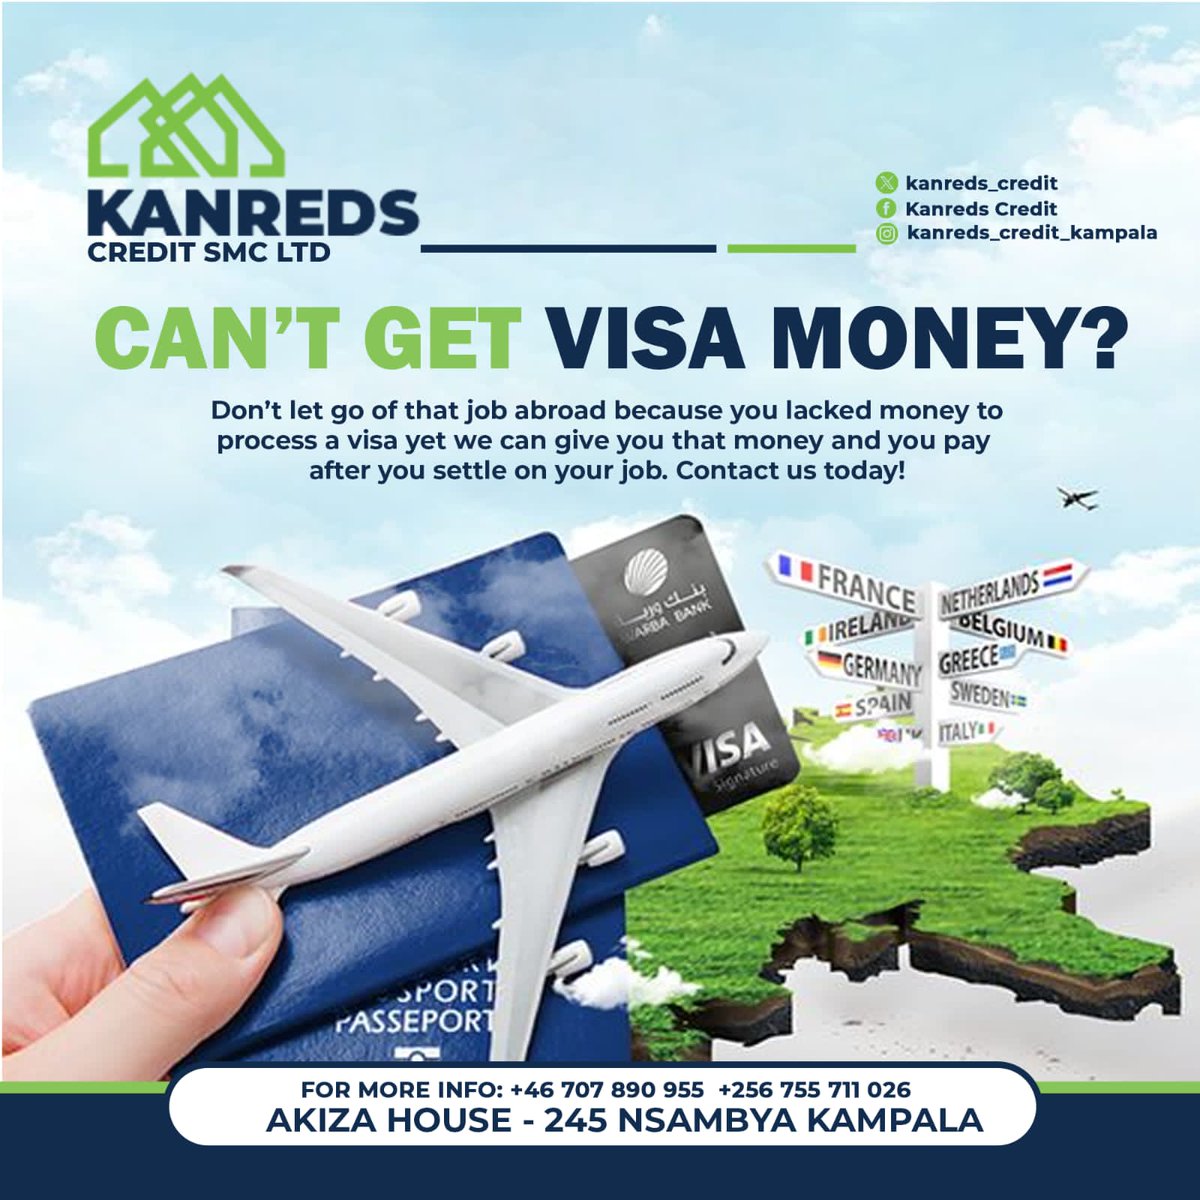 Well here is the opportunity, you can go get a visa money and pay later with #KanredsCredit.